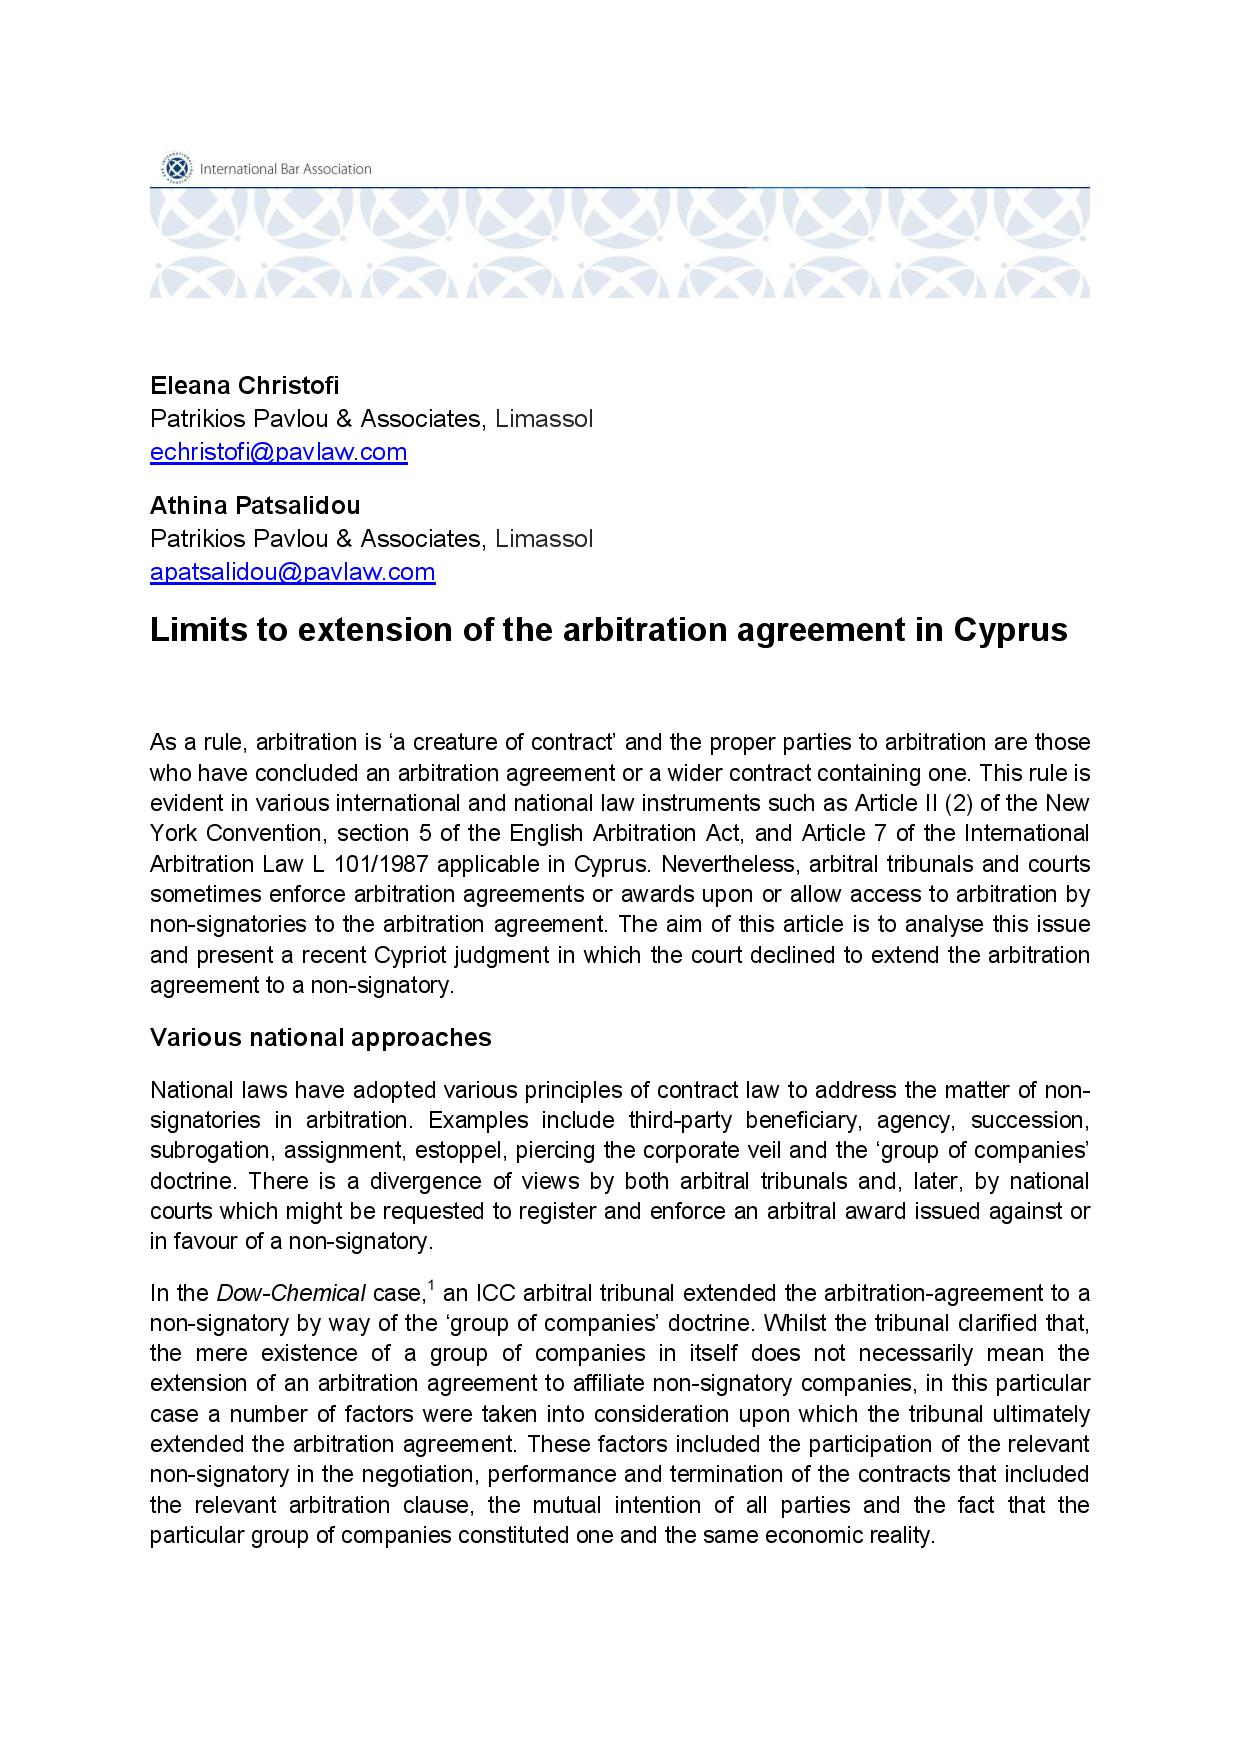 Limits to extension of the arbitration agreement in Cyprus